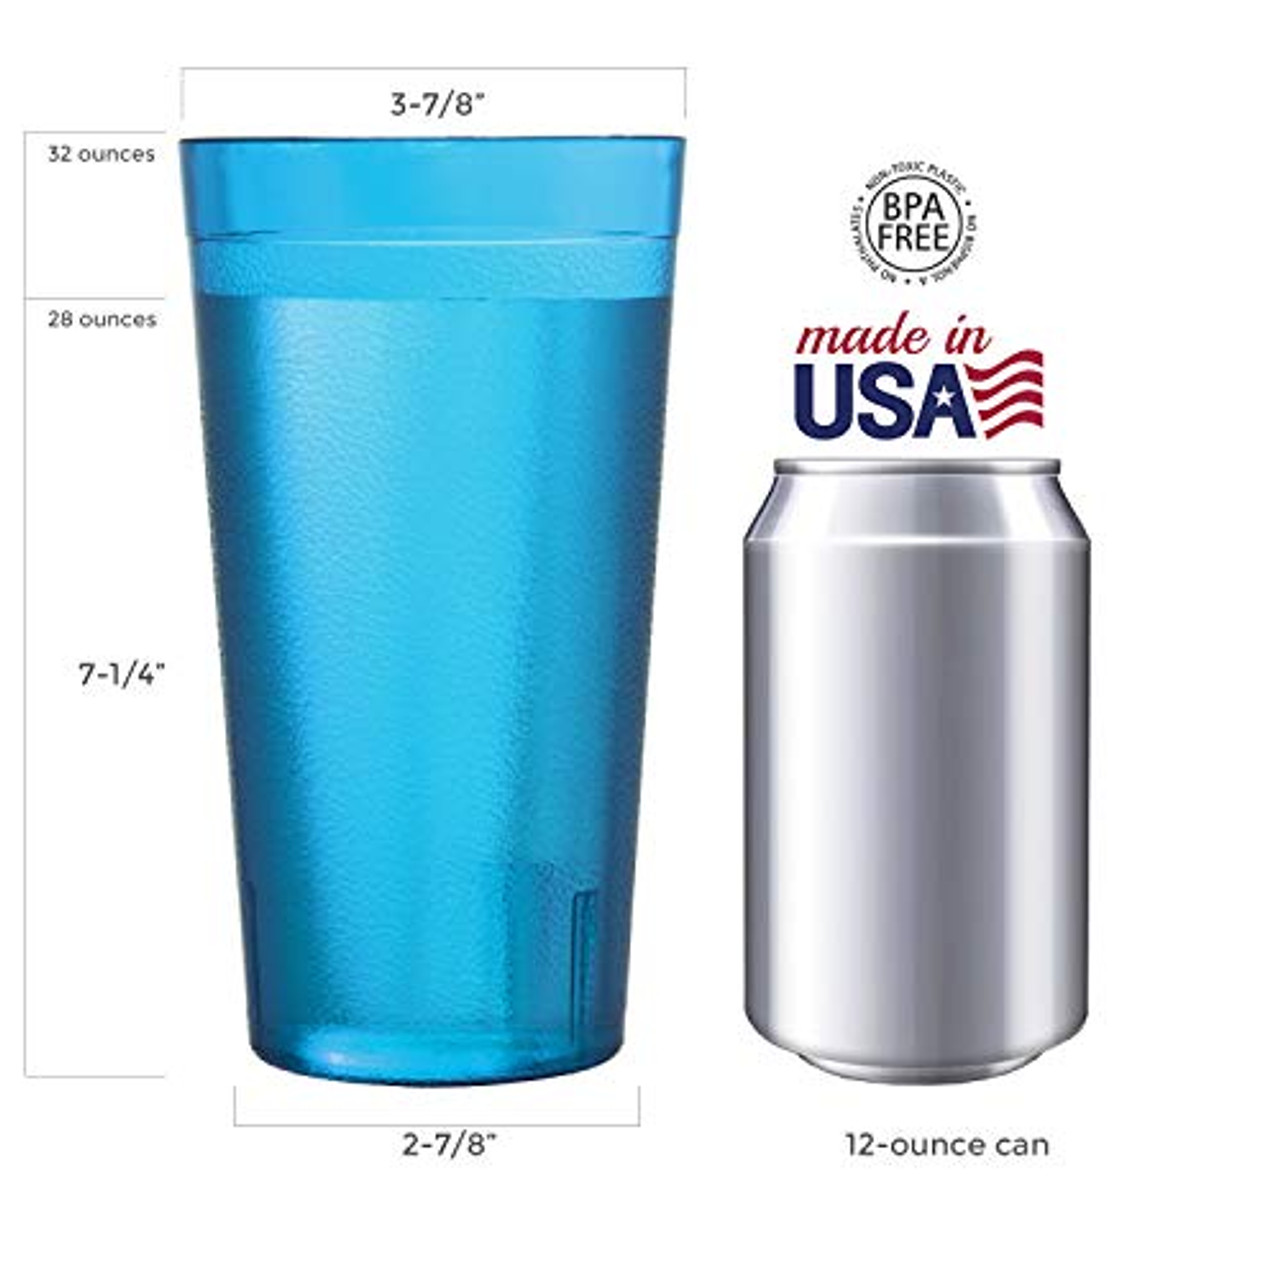 32-ounce Plastic Restaurant-Style Tumblers